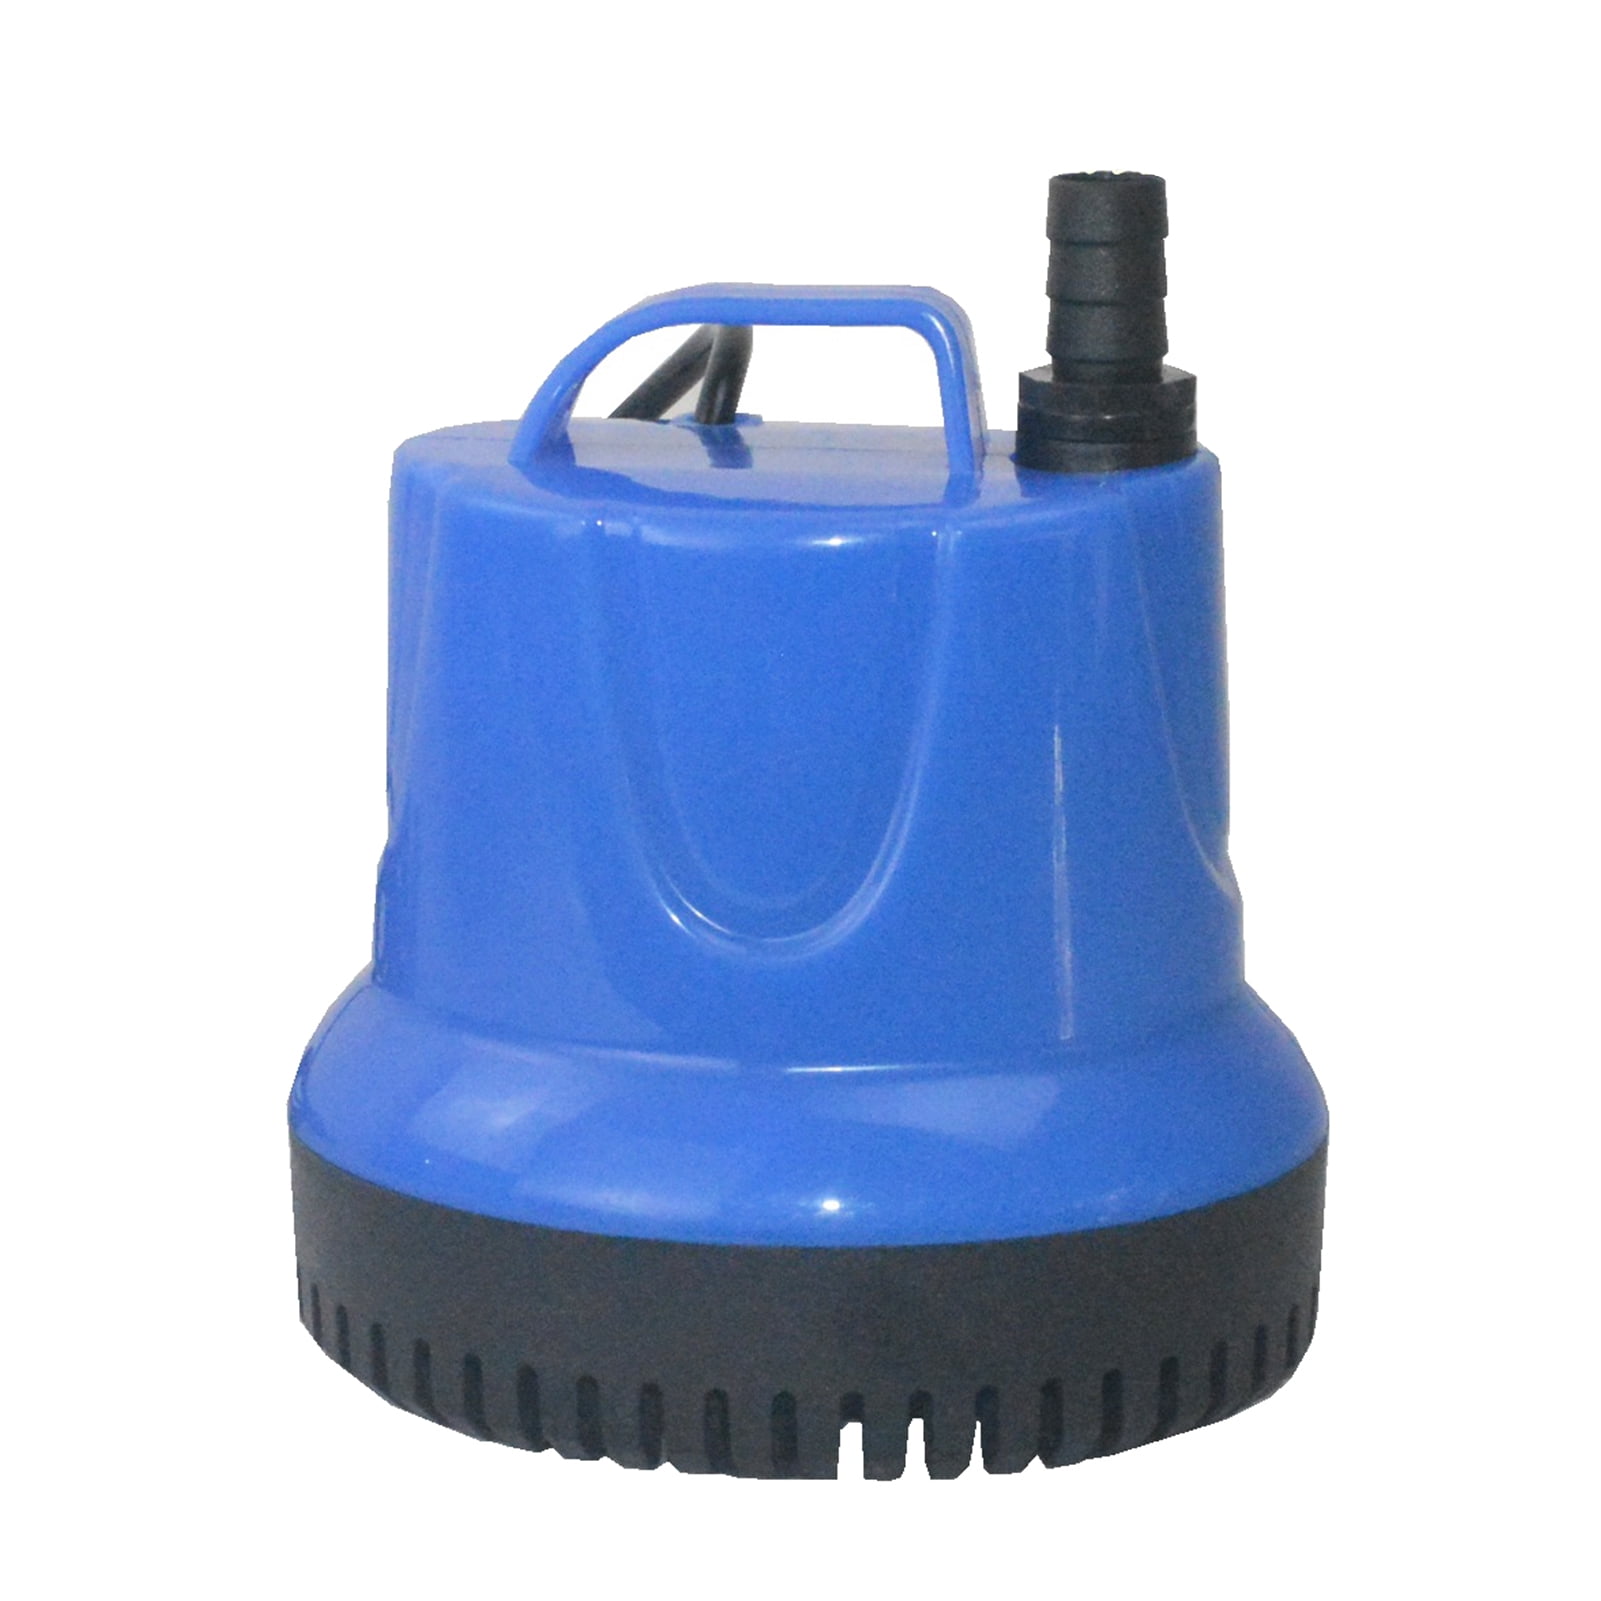 Details about   Water Fountain Aquarium Pump with 4 LED Light Super Silent Small Submersible Wat 